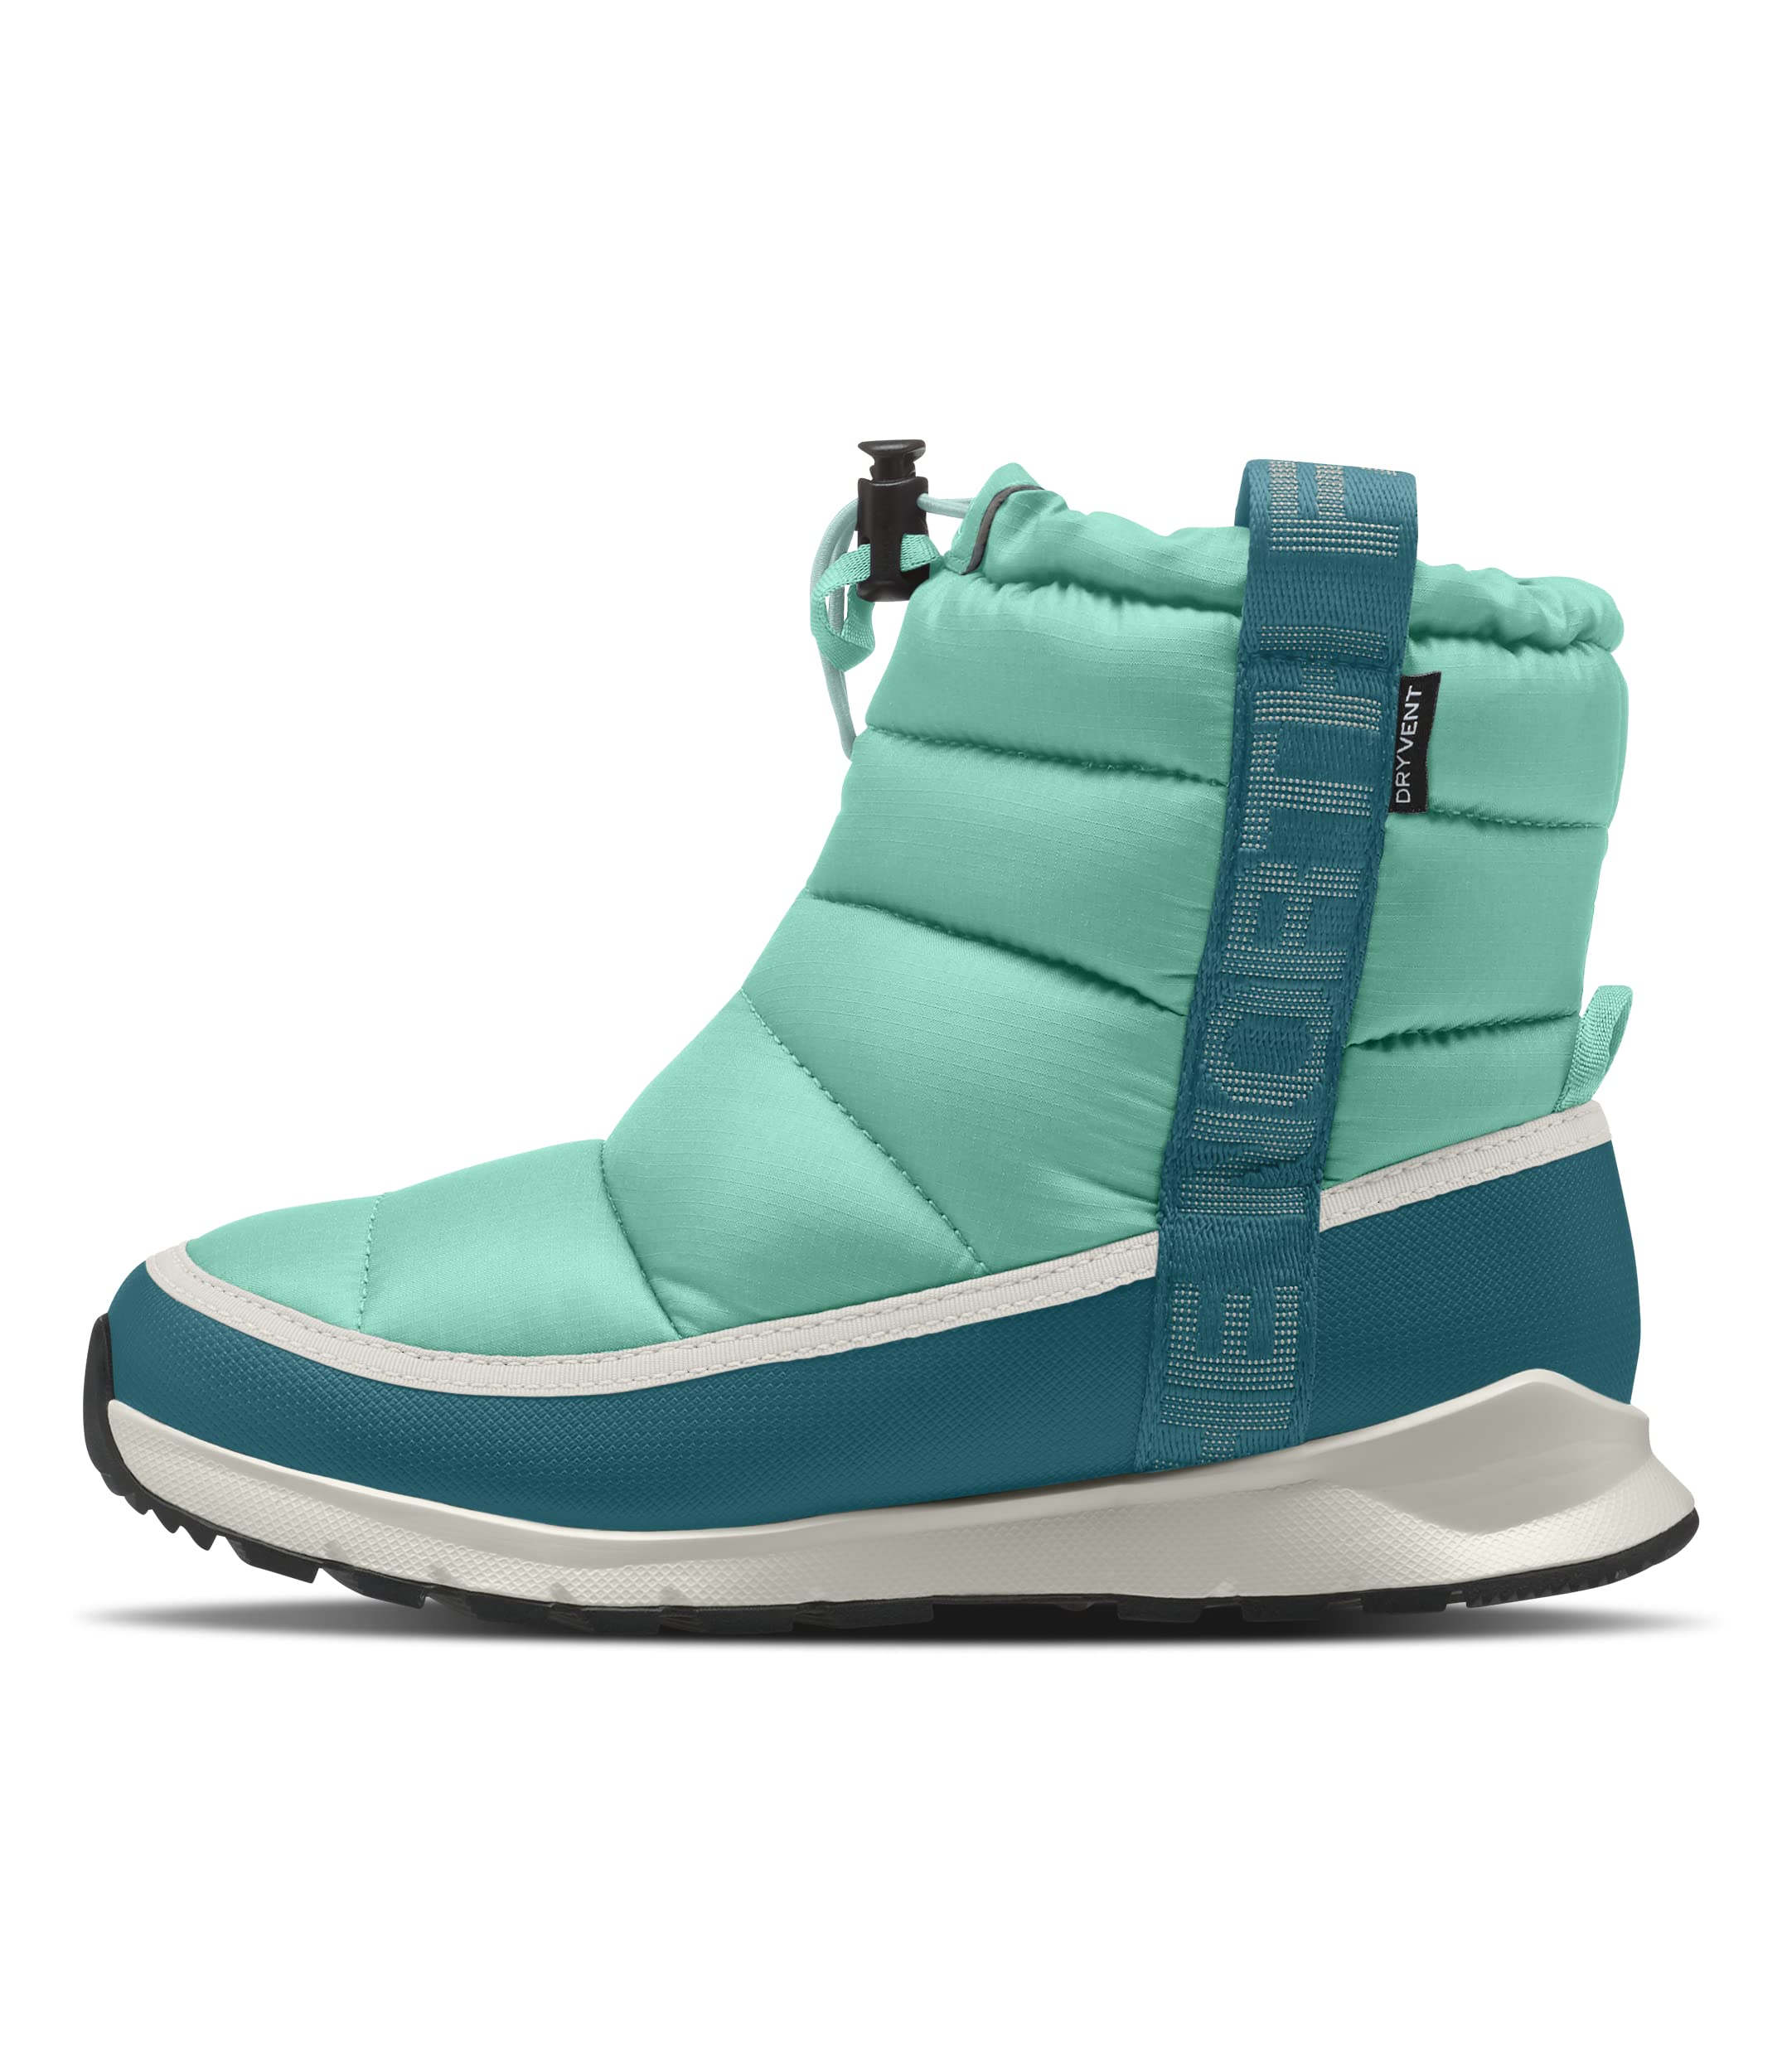 THE NORTH FACE Kids' ThermoBall Pull-On Insulated Waterproof Boot